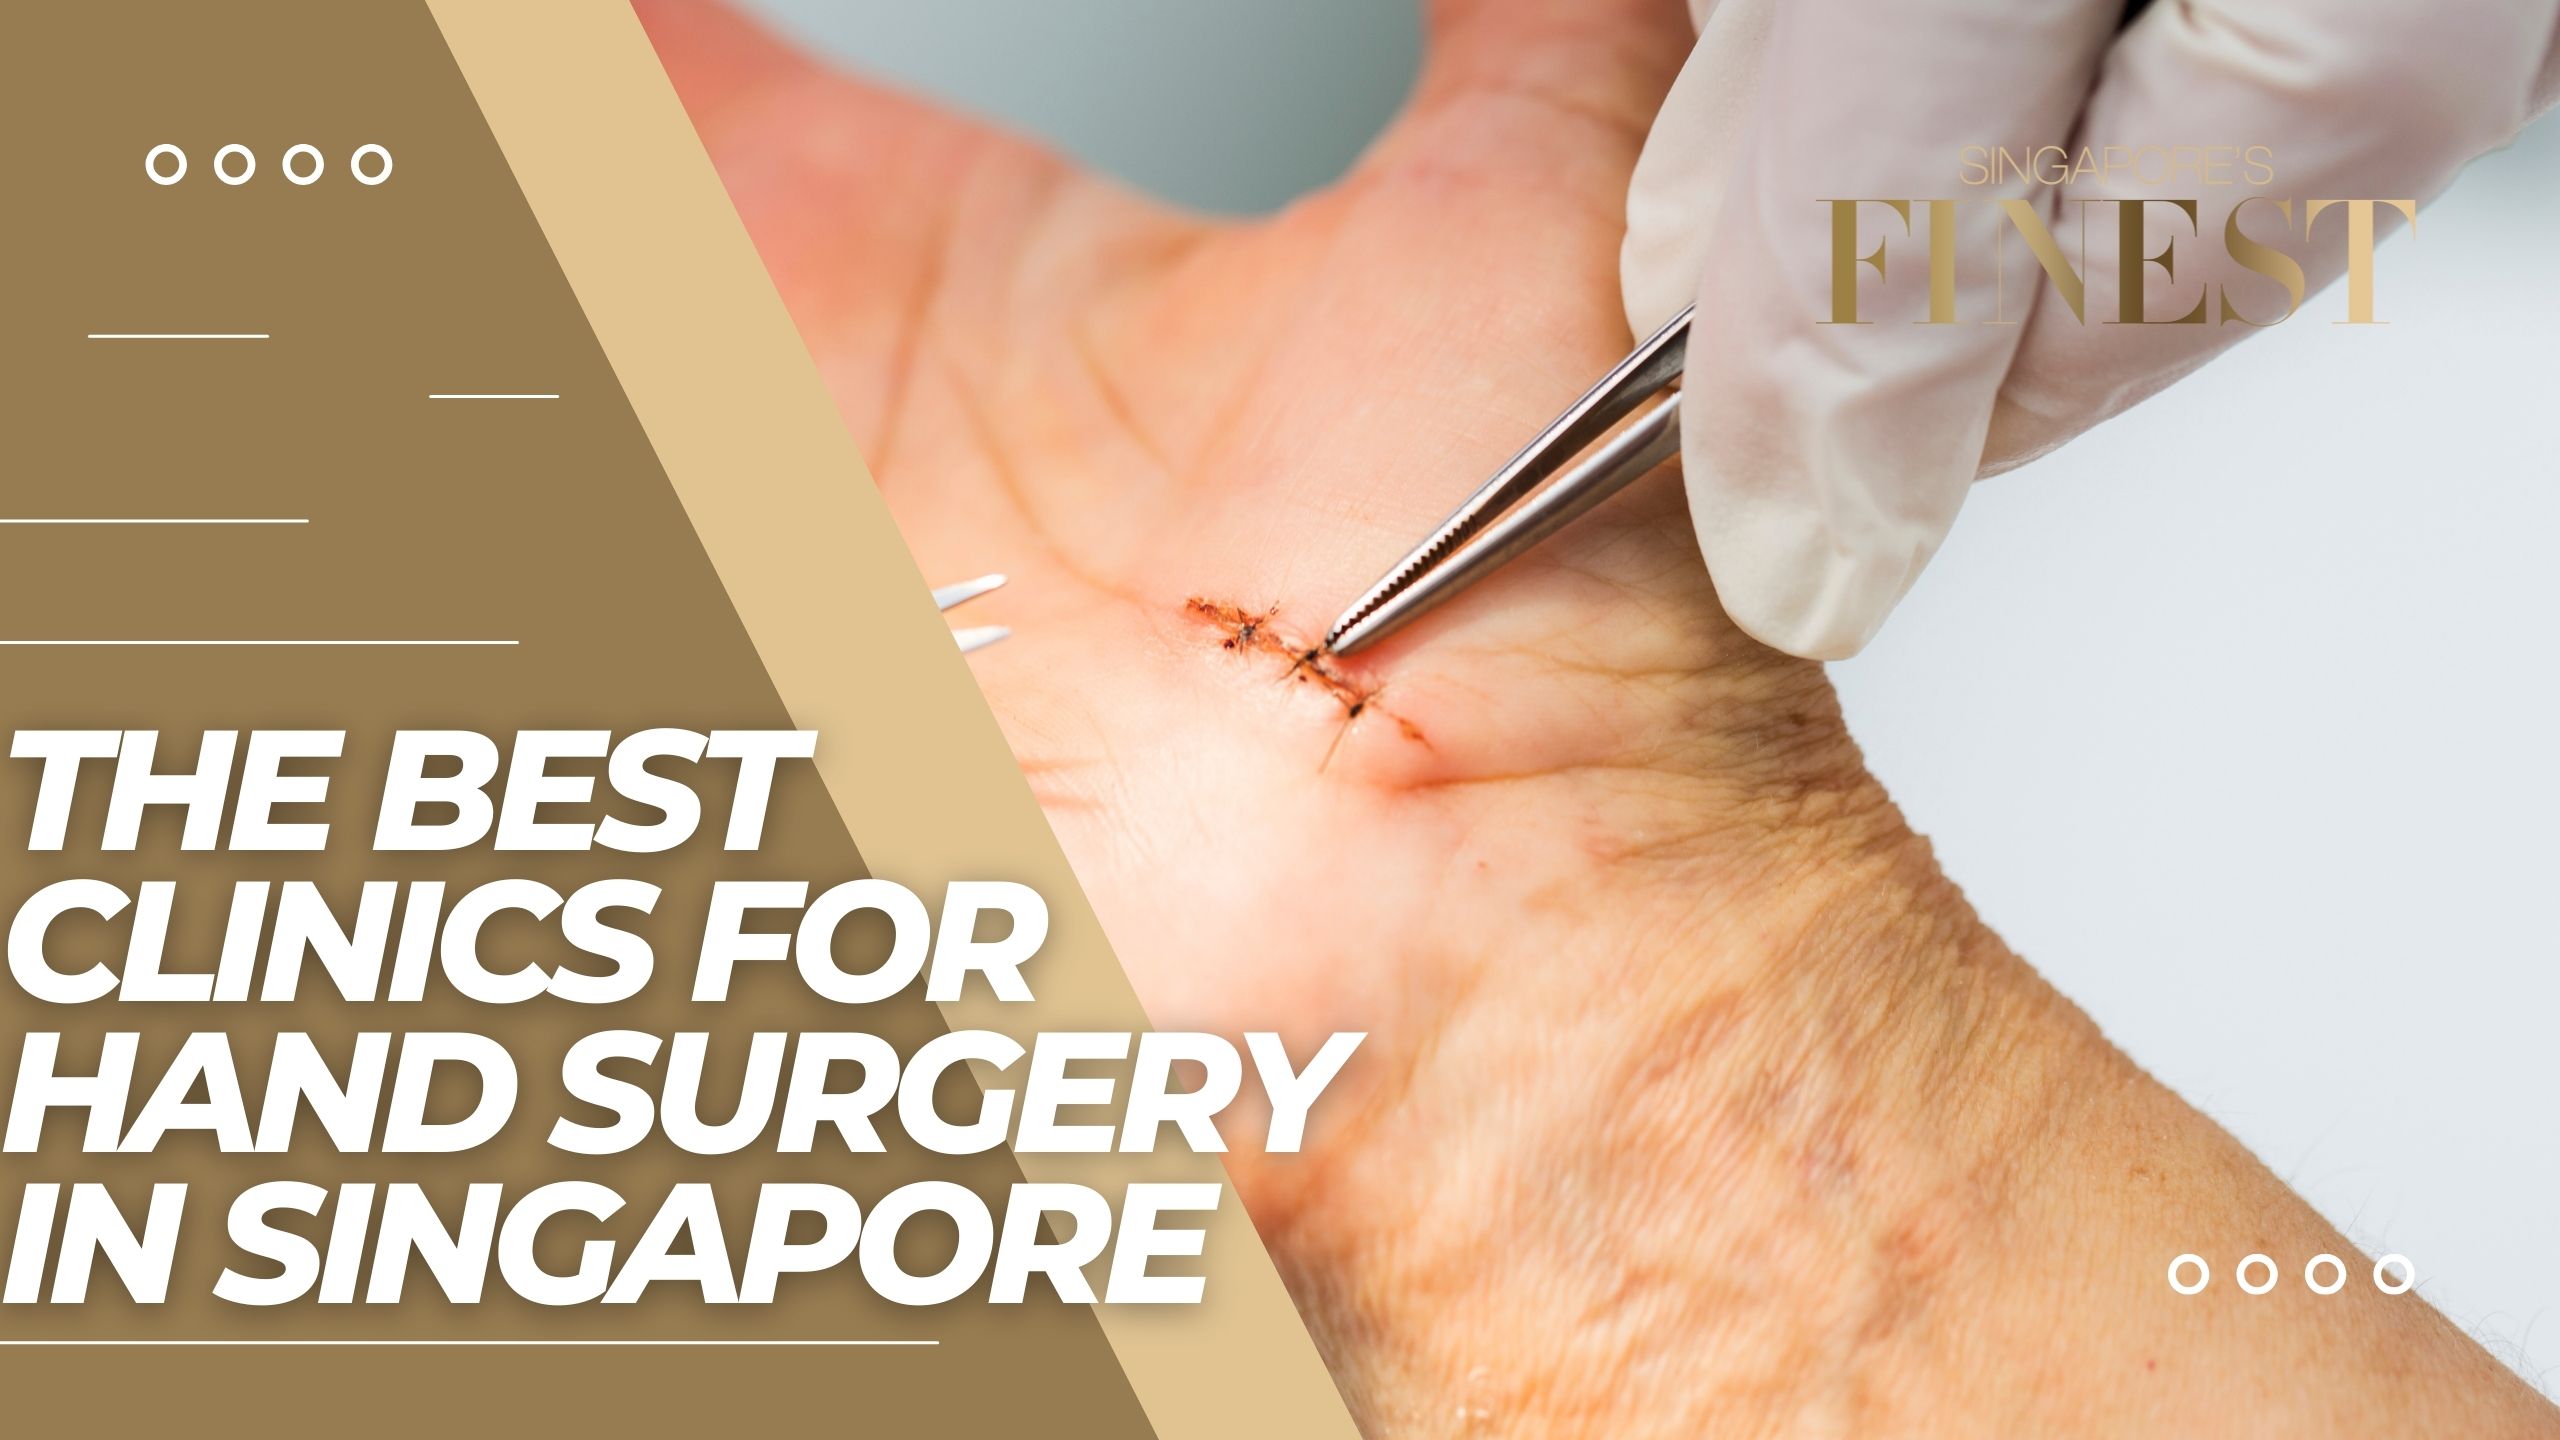 The Finest Clinics for Hand Surgery in Singapore